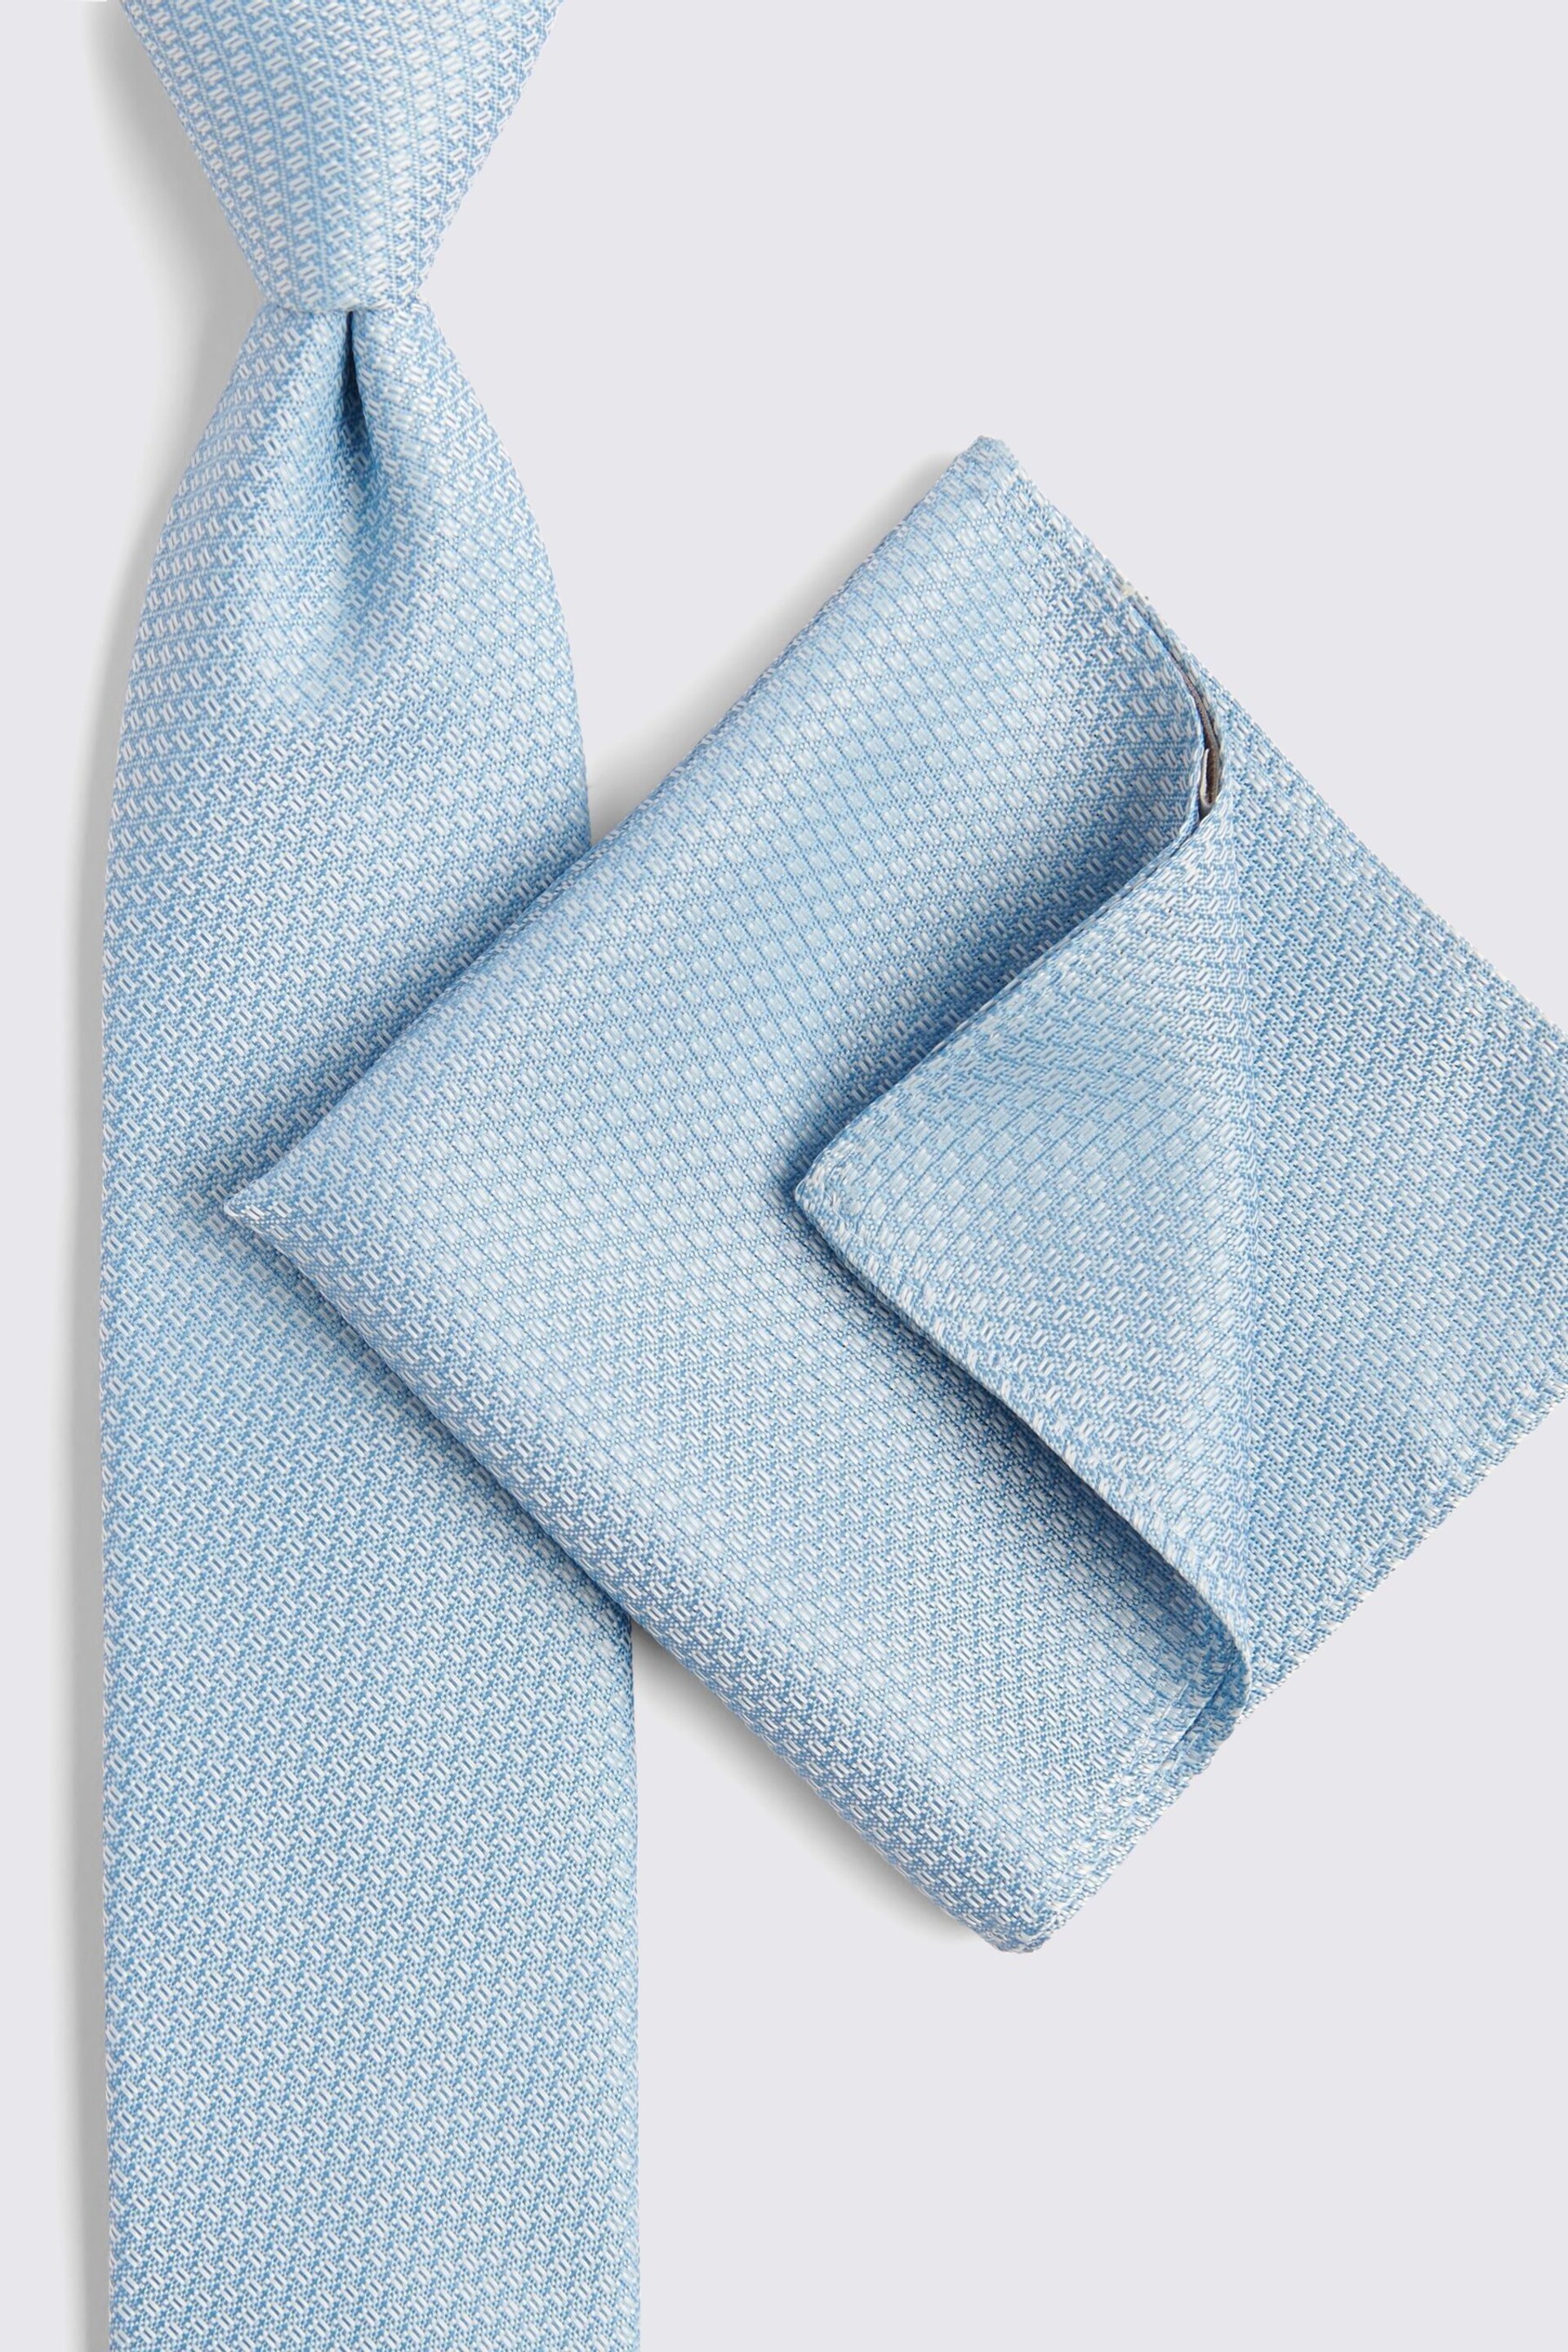 MOSS Blue Textured Tie - Image 4 of 4